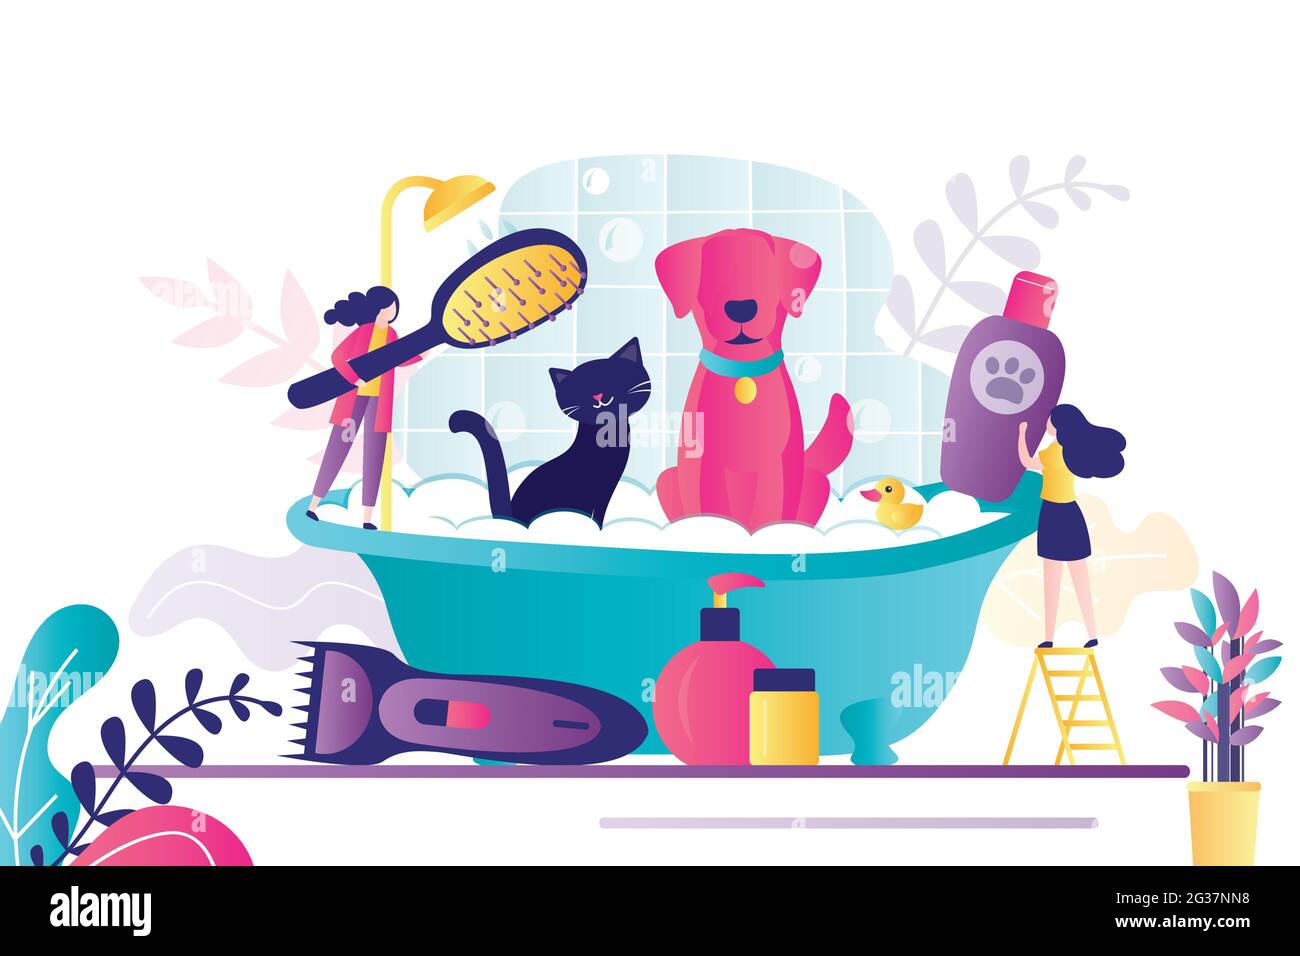 Women workers bathe, wash and clean pets. Professional groomer with brush and shampoo bottle. Various accessories for animal hair care. Pet grooming s Stock Vector